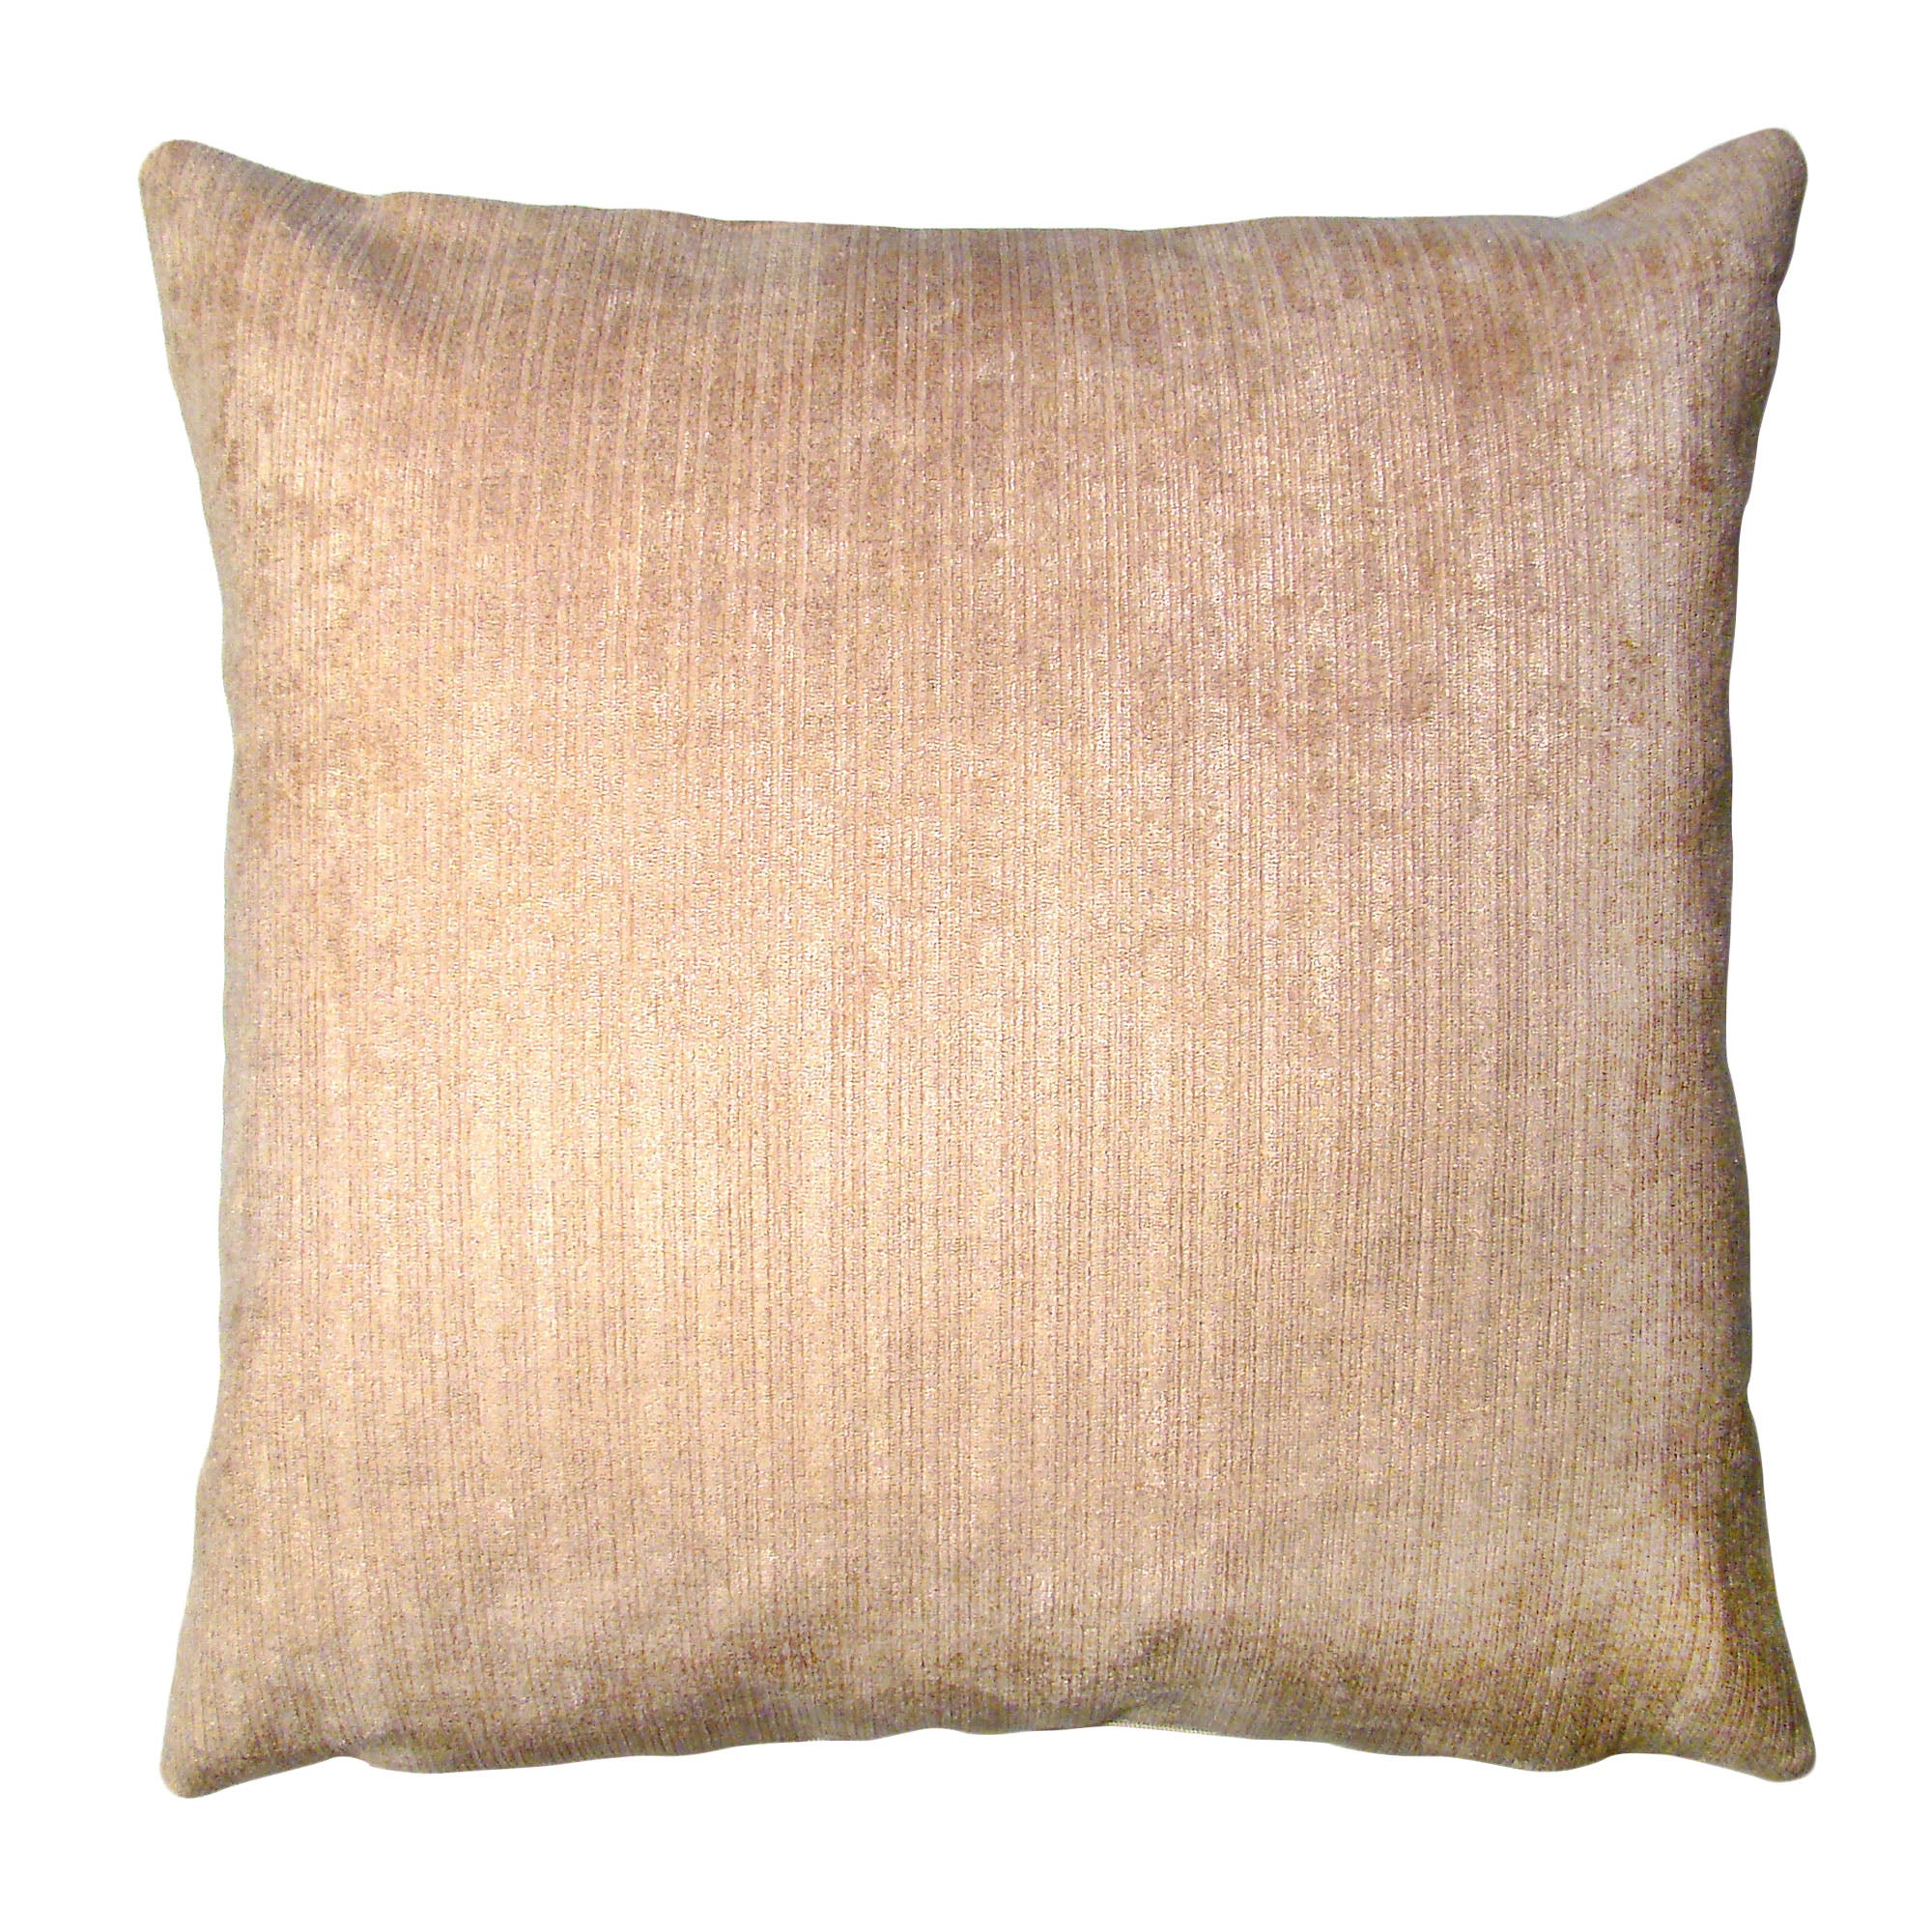 Topaz Cushion Cover Biscuit Brown